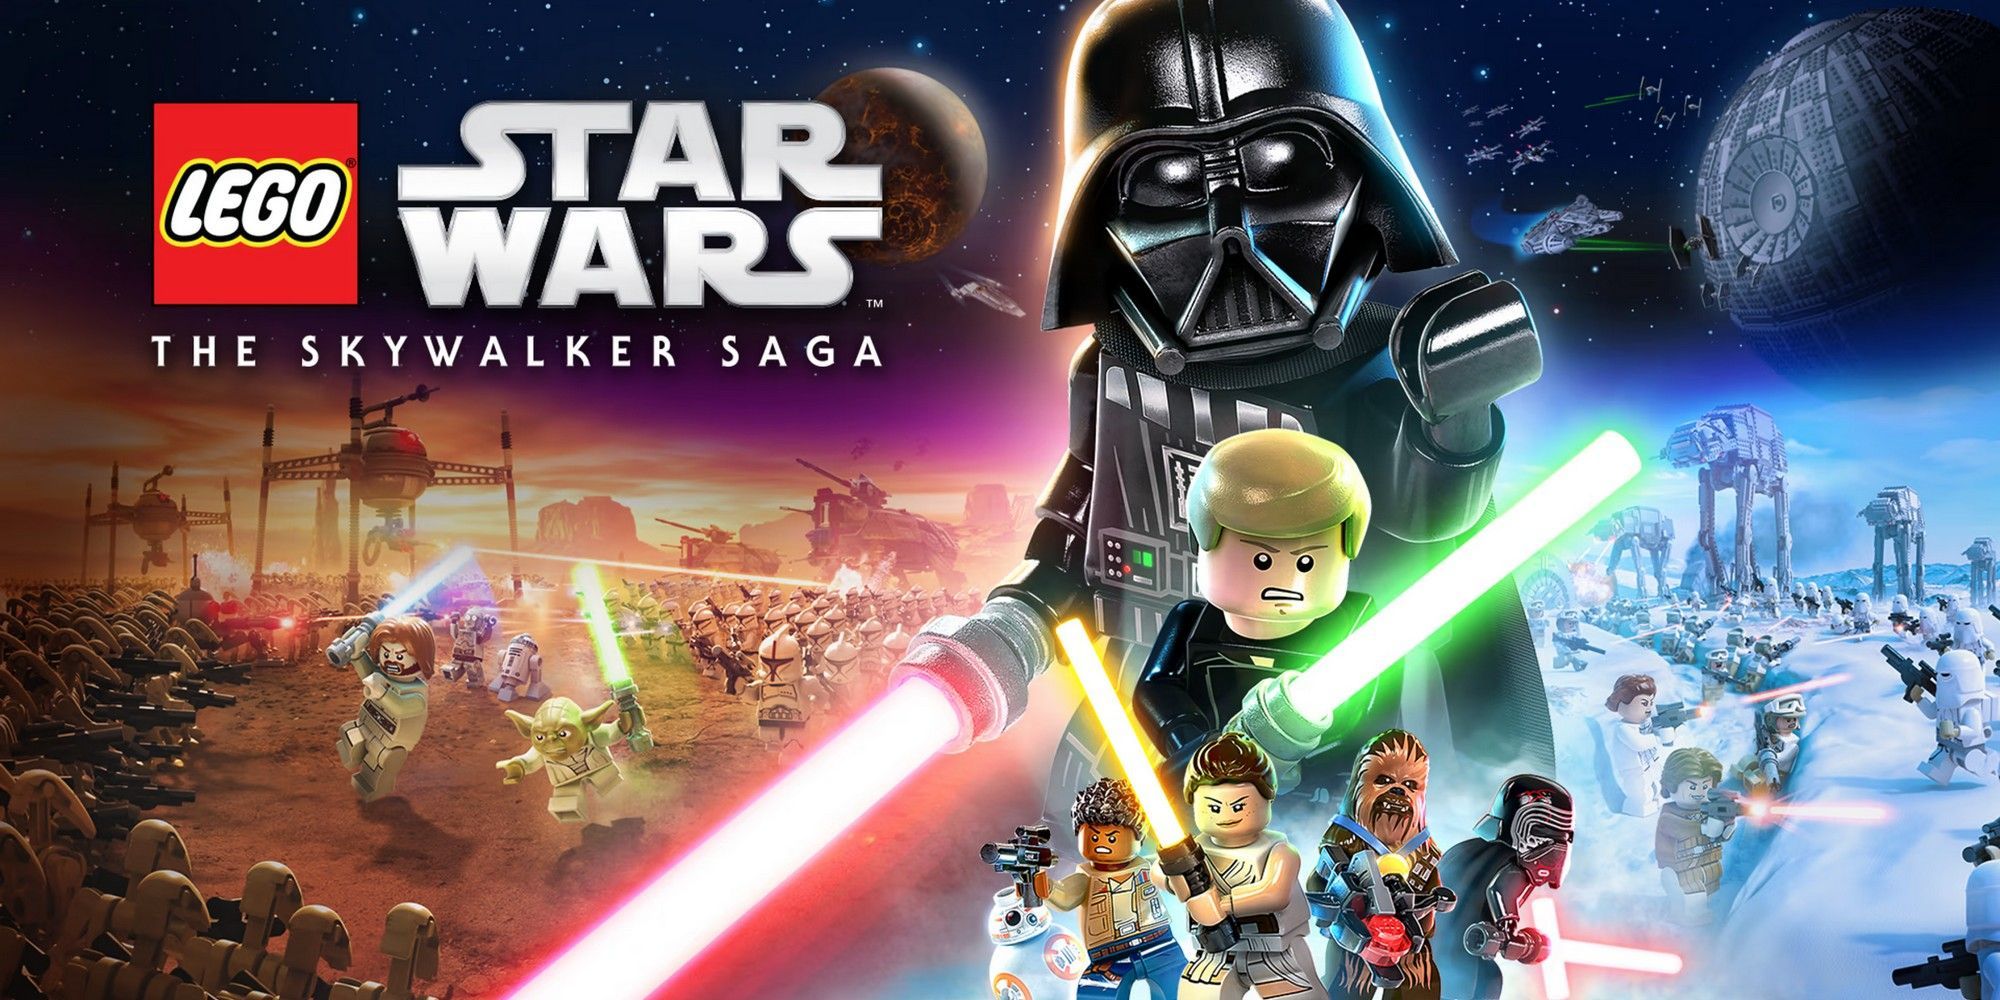 Lego Star Wars The Skywalker Saga - Luke Skywalker, Darth Vader, Rey, Poe, BB-8, Chewbacca, And Kylo Ren Posing With Their Lightsabers And Blasters